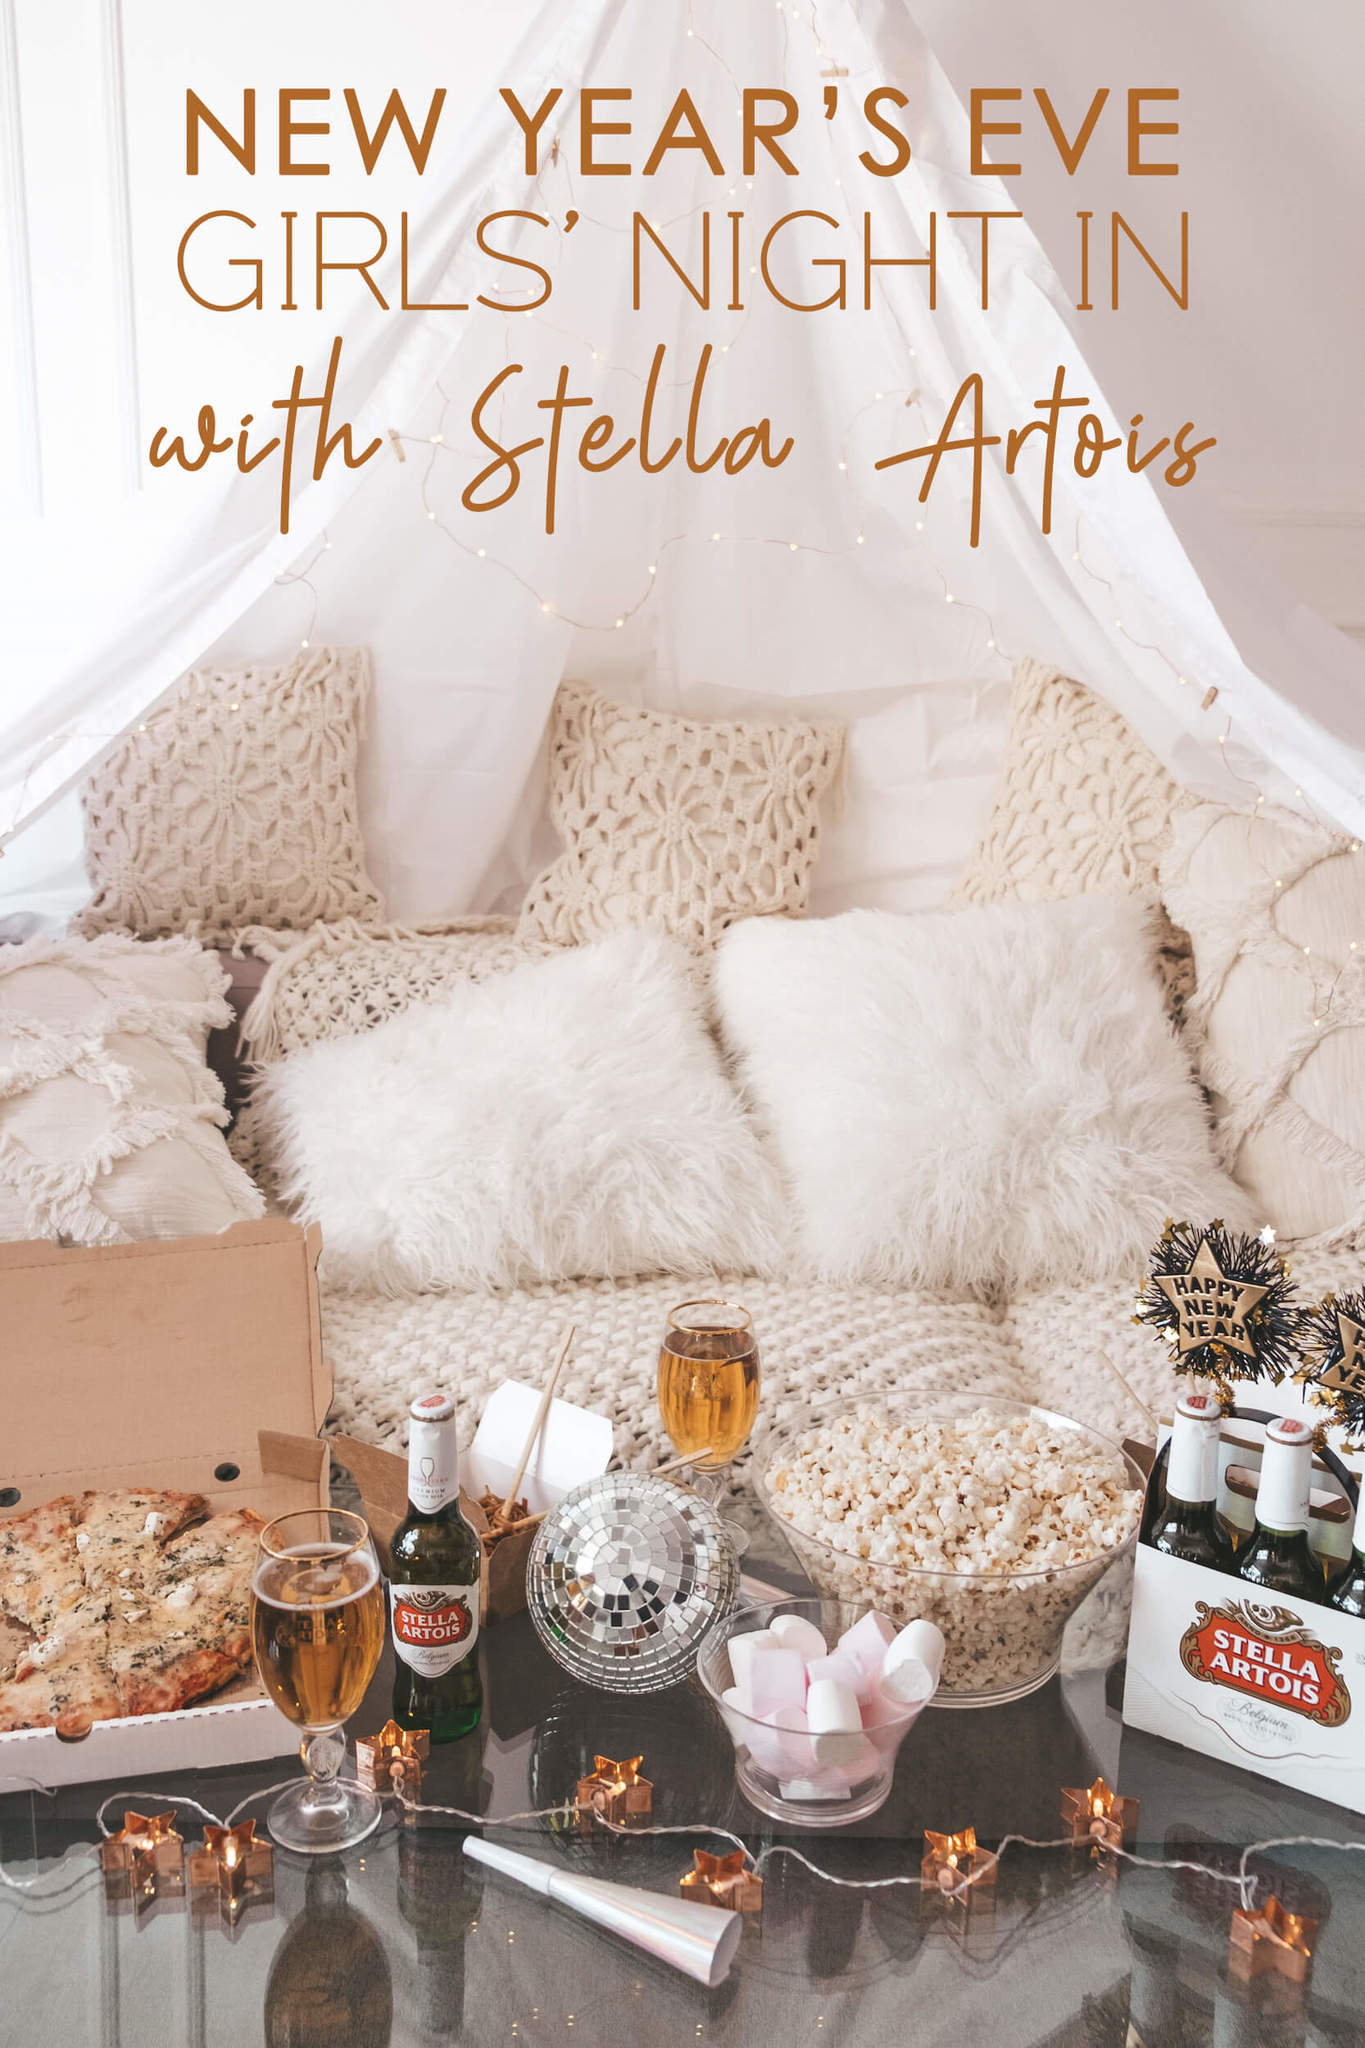 New Year's Eve Girls Night In with Stella Artois